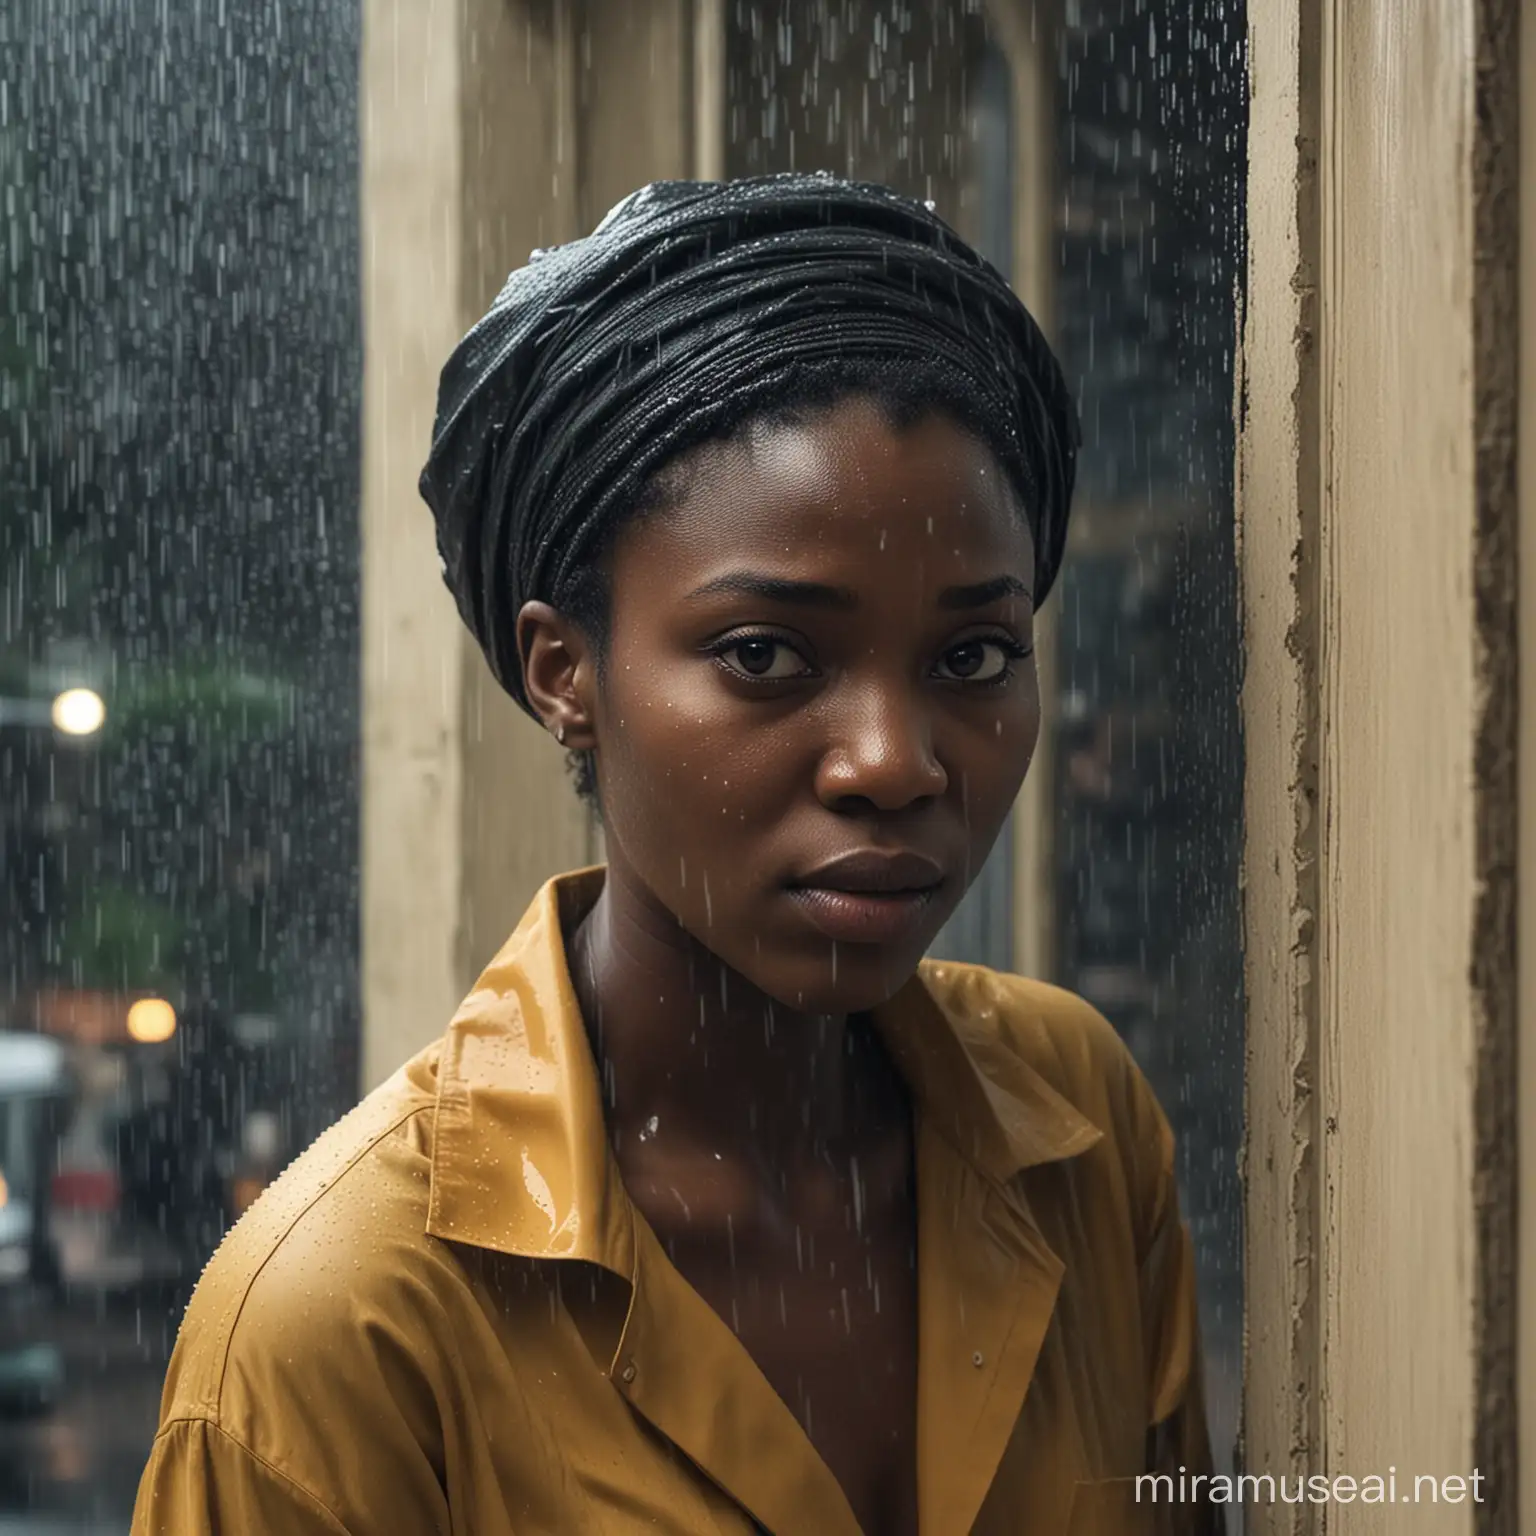 Describe a Nigerian as the protagonist's frantic efforts to close their windows during a heavy rainstorm, only to overhear a chilling conversation outside.